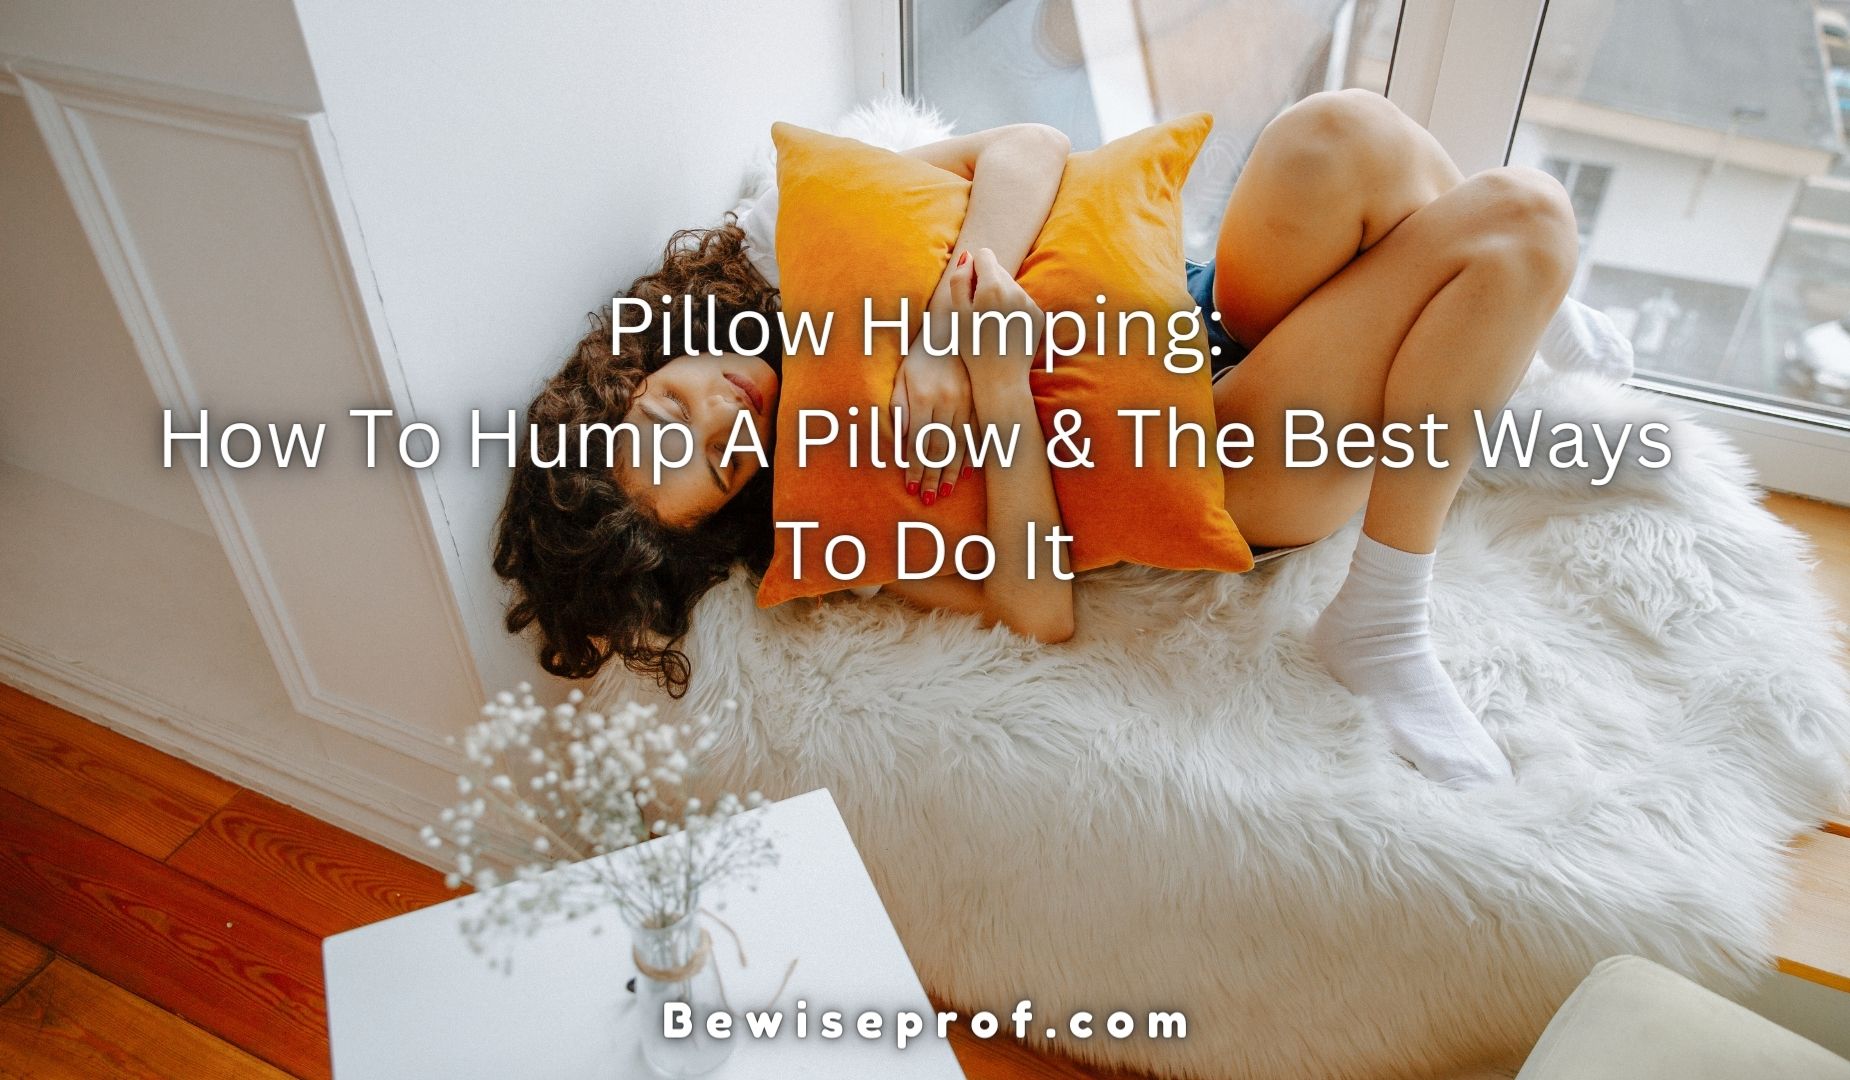 carmen blaga recommends How To Dry Hump A Pillow